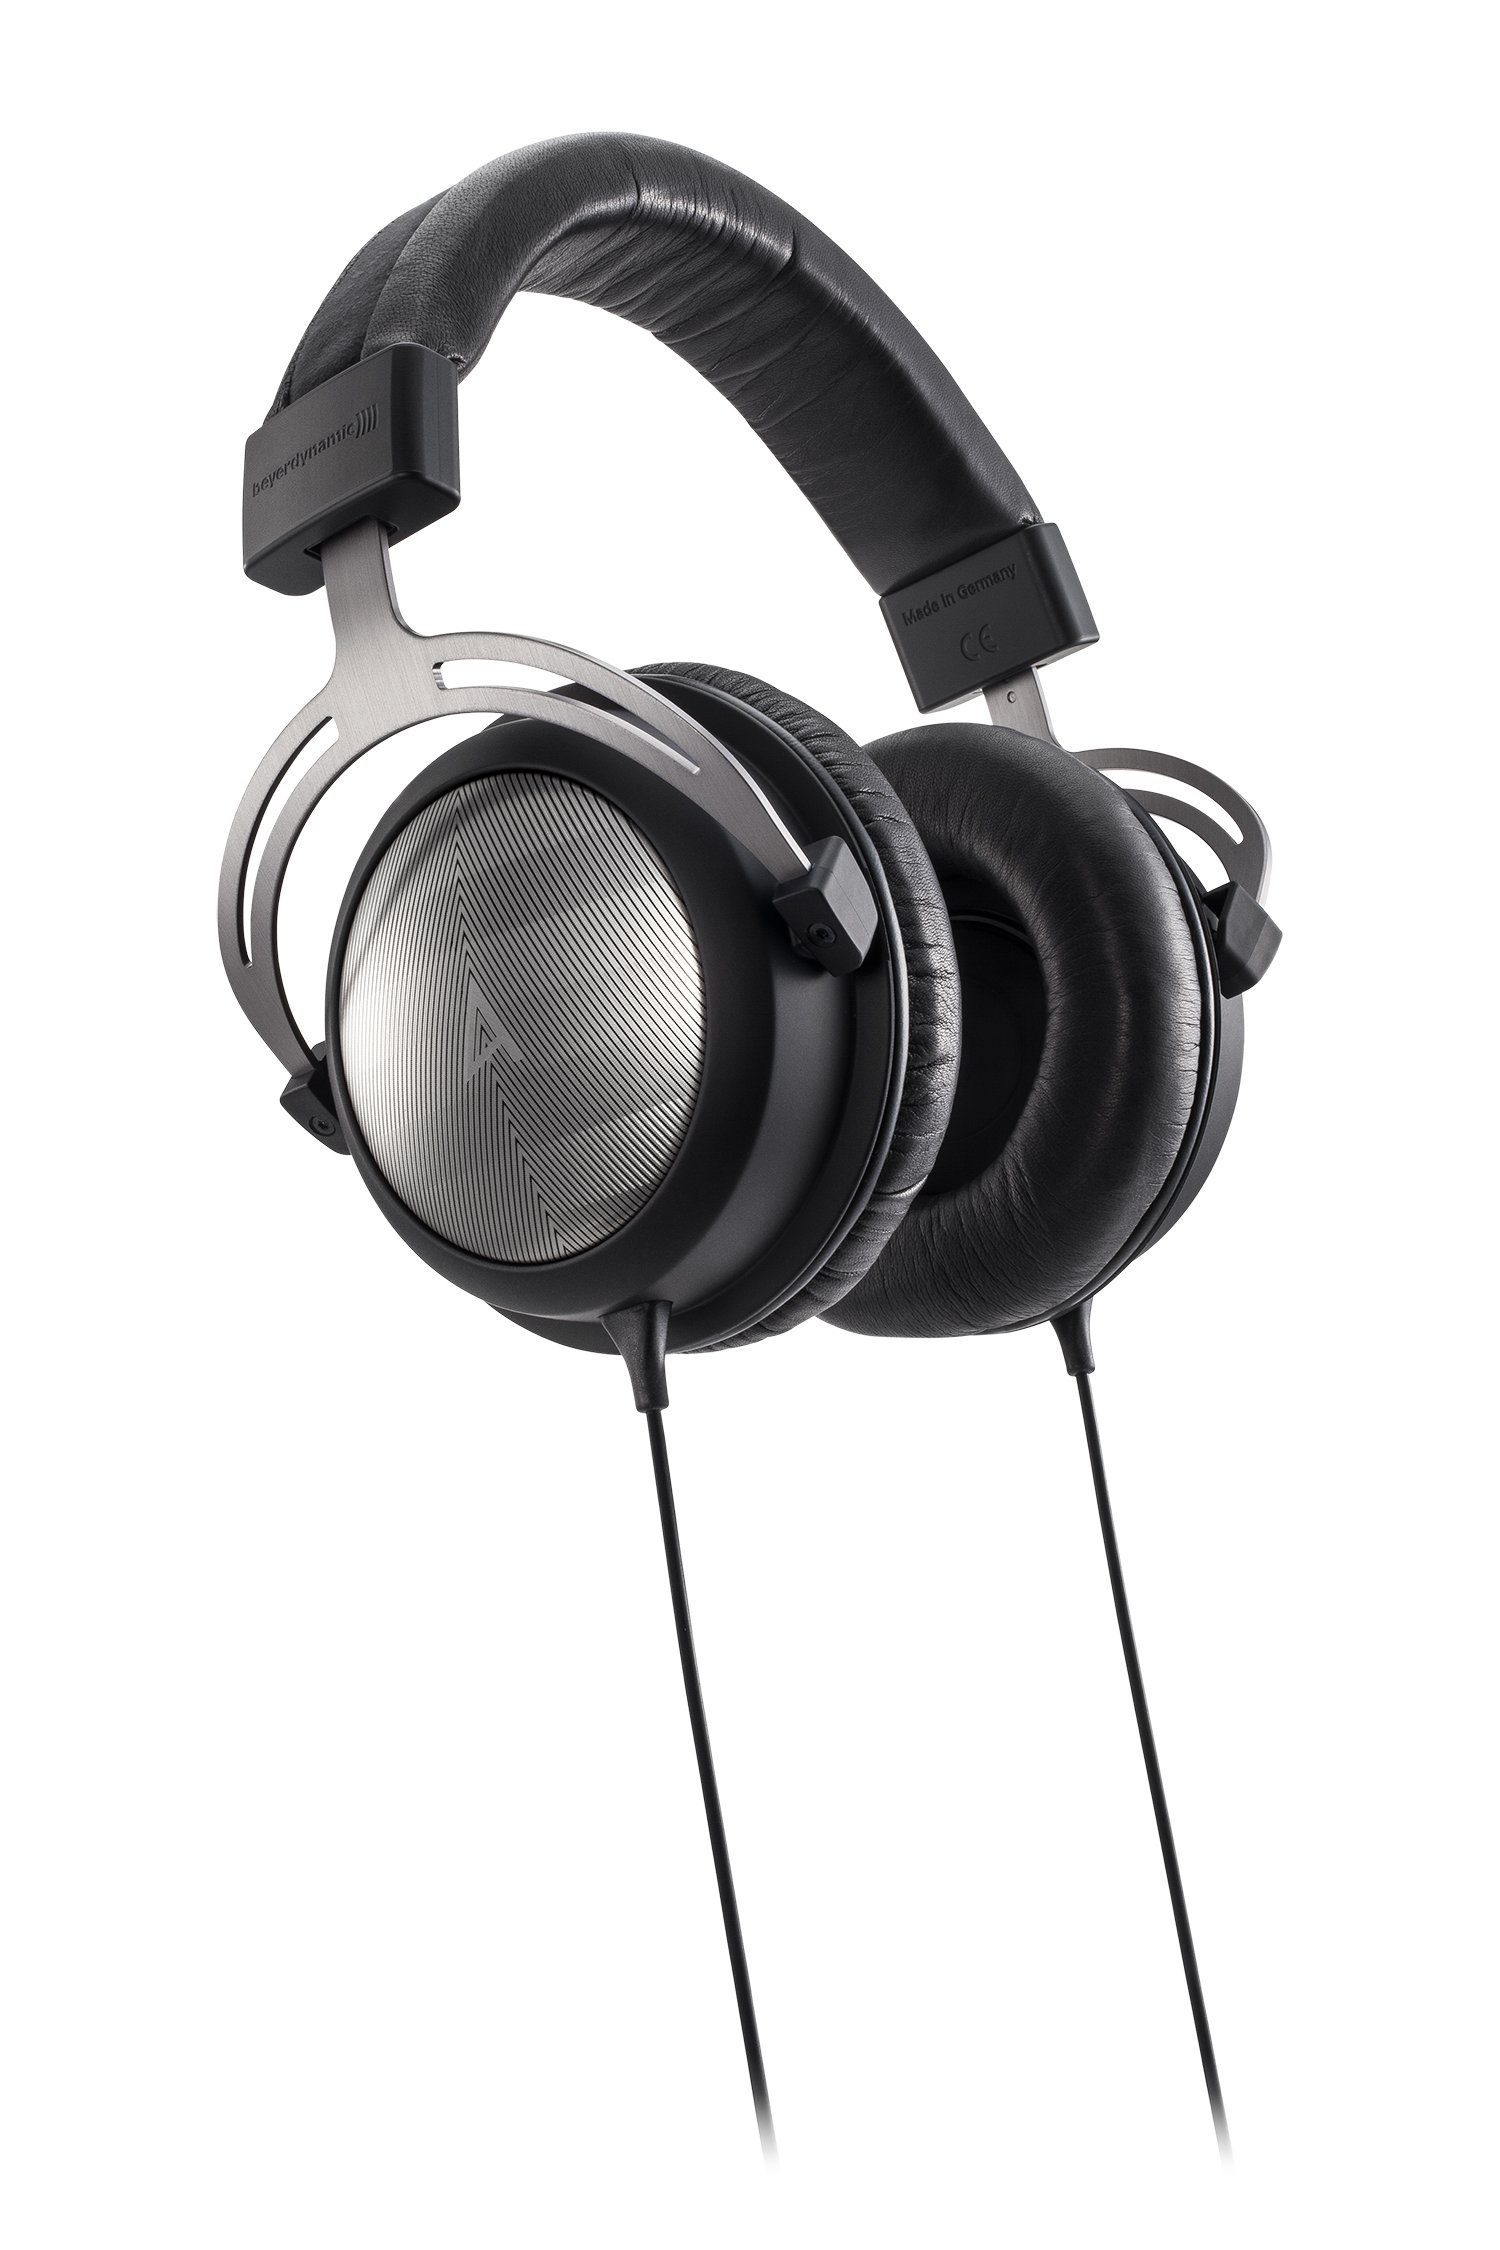 Astell&Kern Beyerdynamic Special Edition AK T5p Closed-Back Headphones with 2.5mm Balanced and 3.5mm Headphone Connector